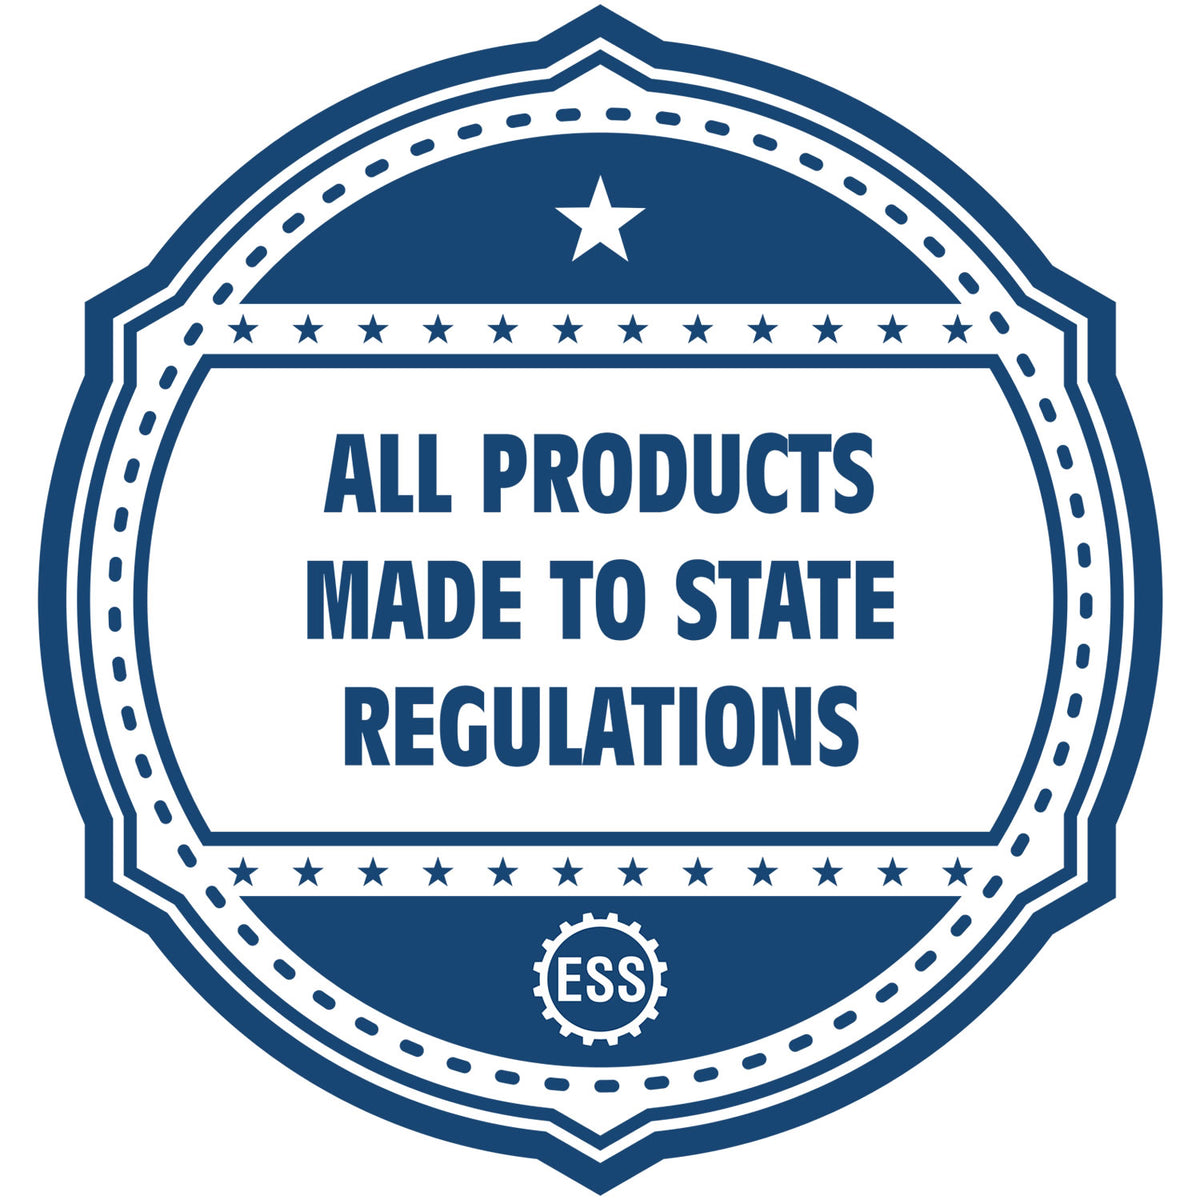 An icon or badge element for the Self-Inking Alaska PE Stamp showing that this product is made in compliance with state regulations.